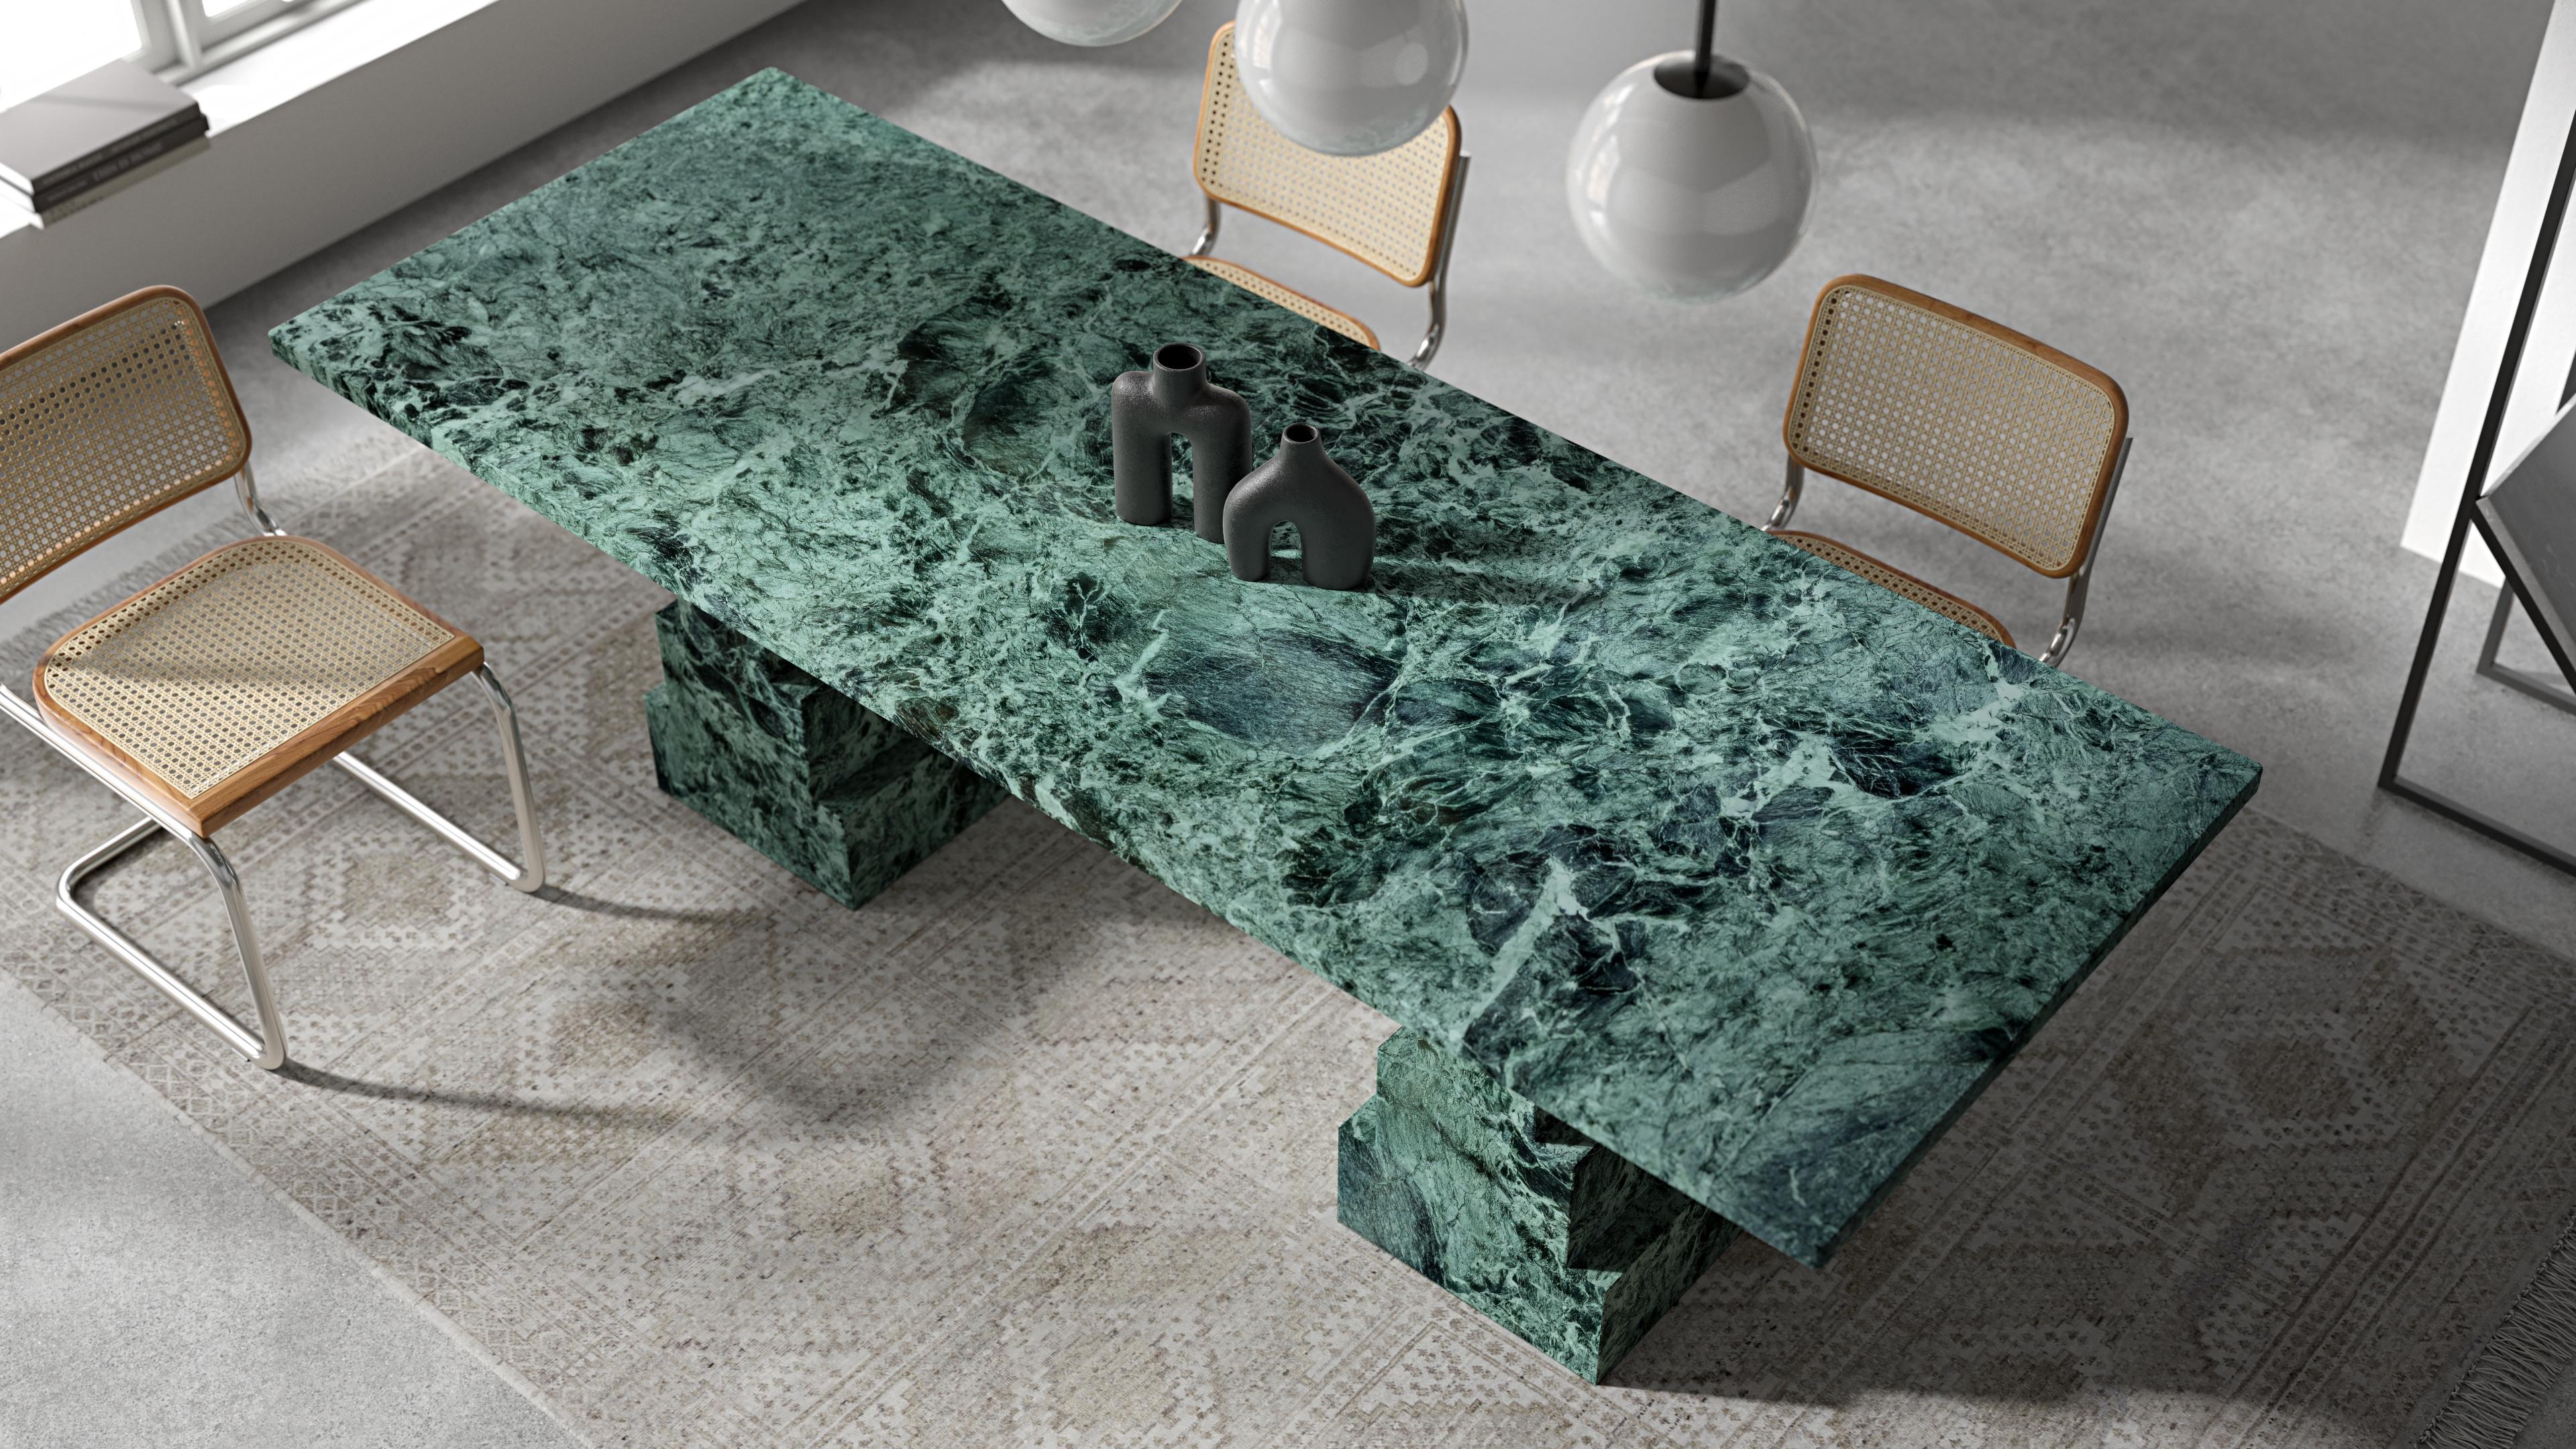 Burnished NORDST NIKO Dining Table, Italian Green Marble, Danish Modern Design, New For Sale